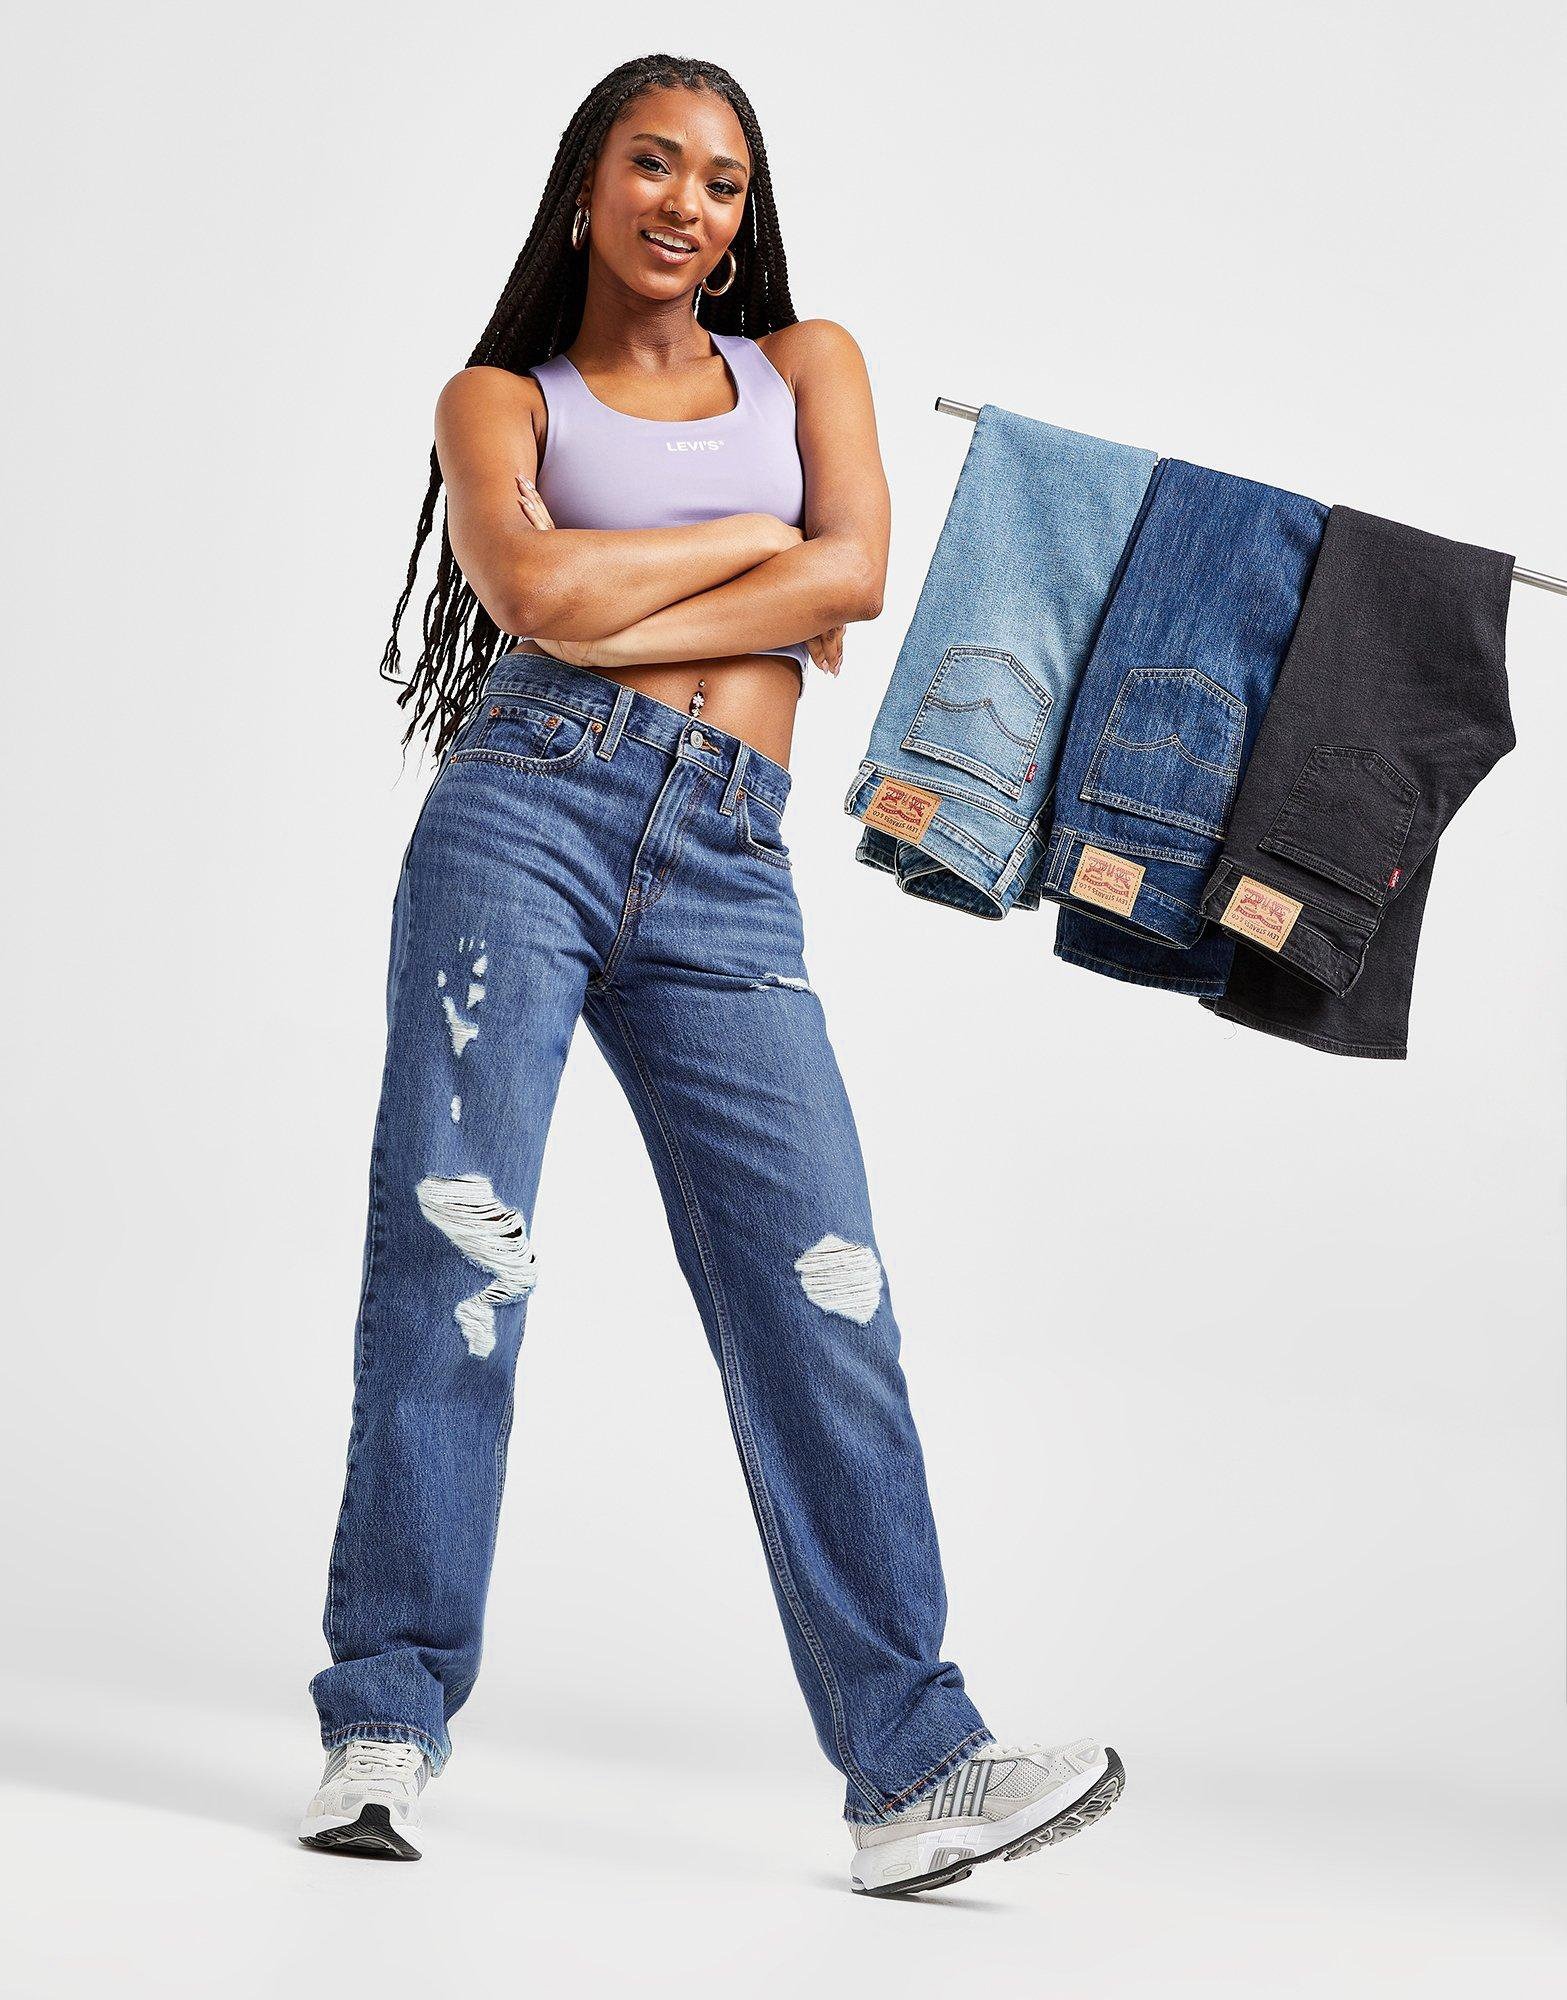 How To Wear Boyfriend Jeans - The Mom Edit - Page 262